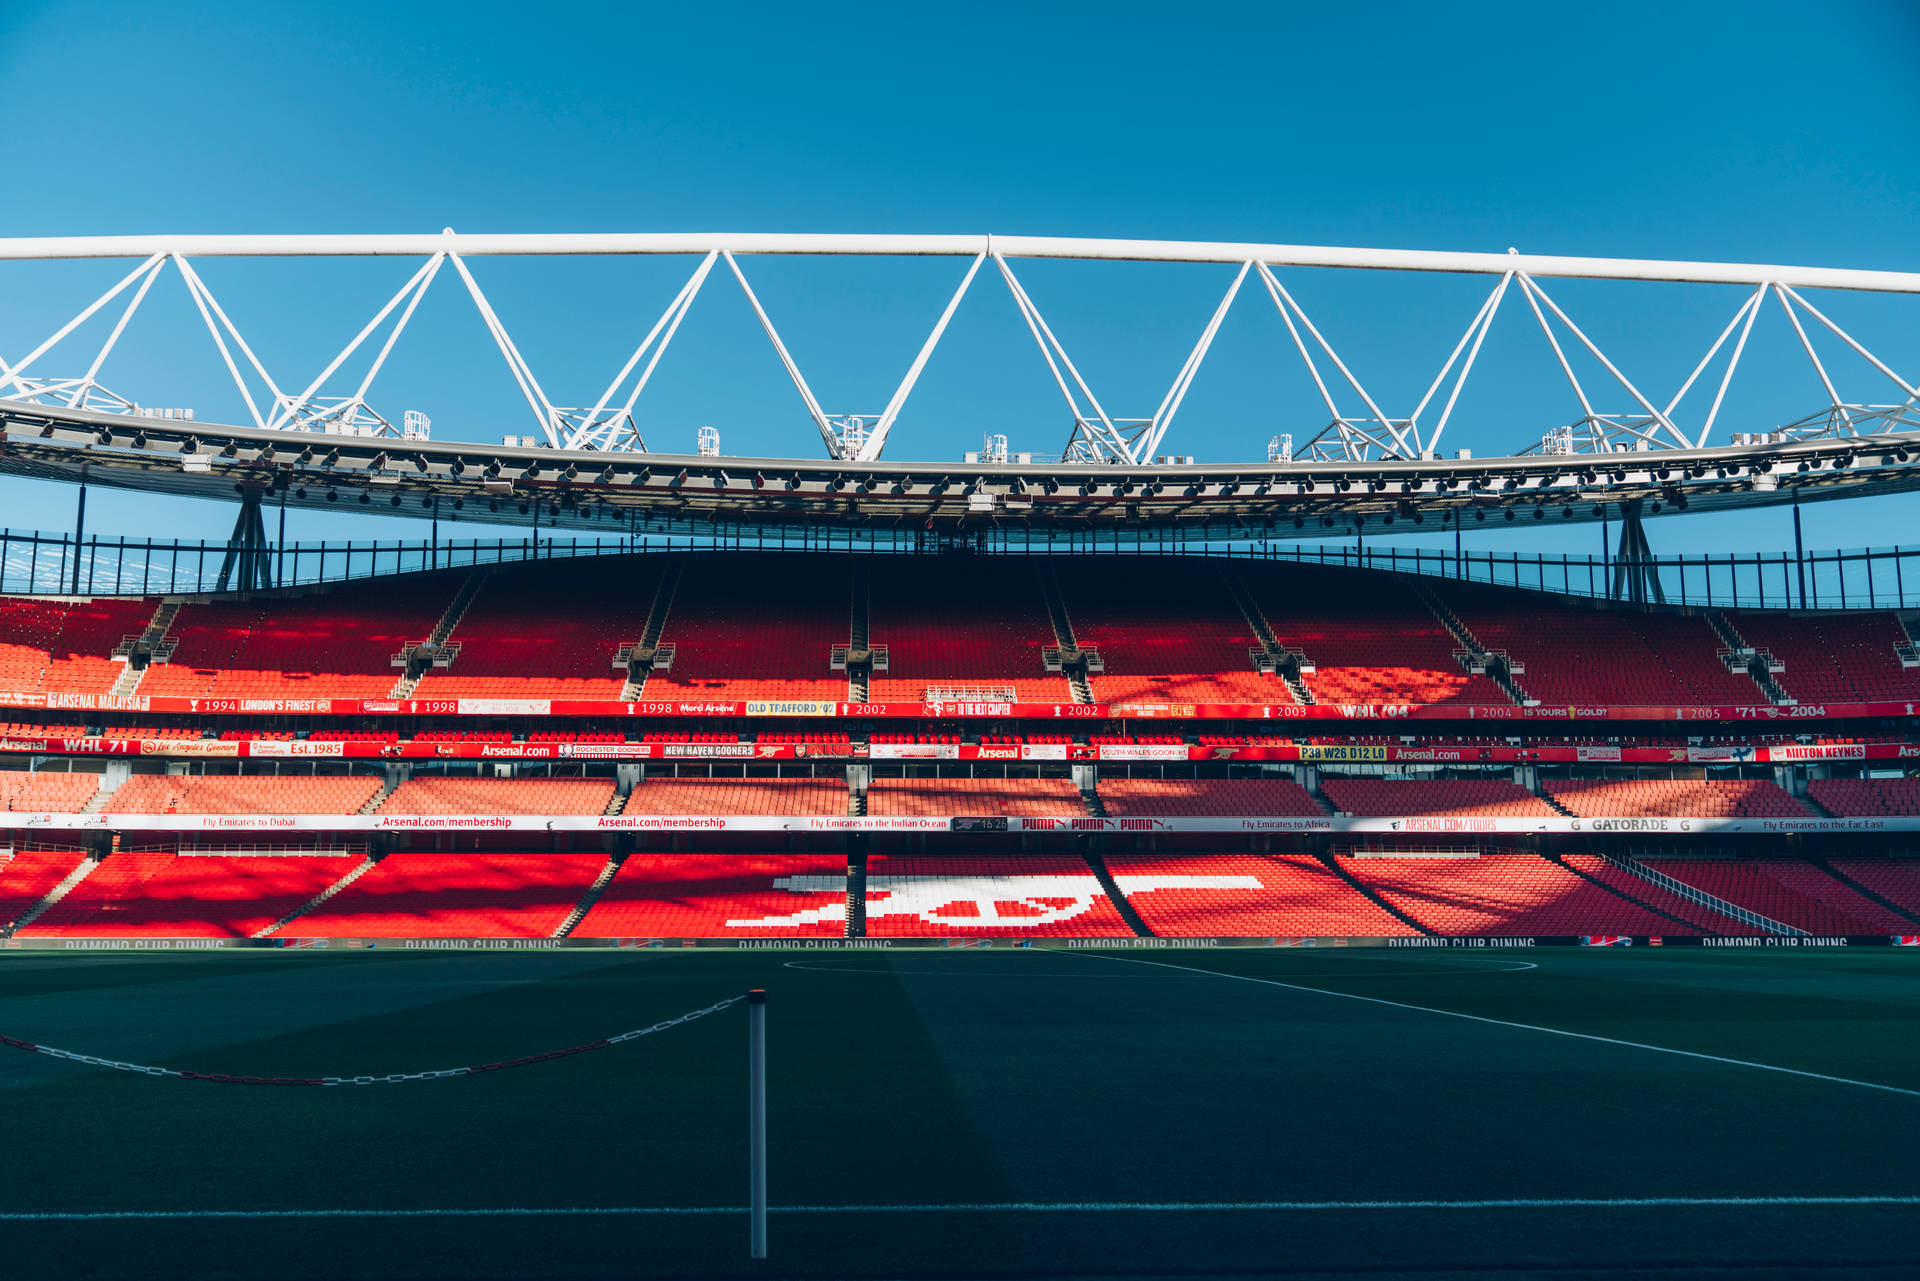 Arsenal 7952X5304 Wallpaper and Background Image